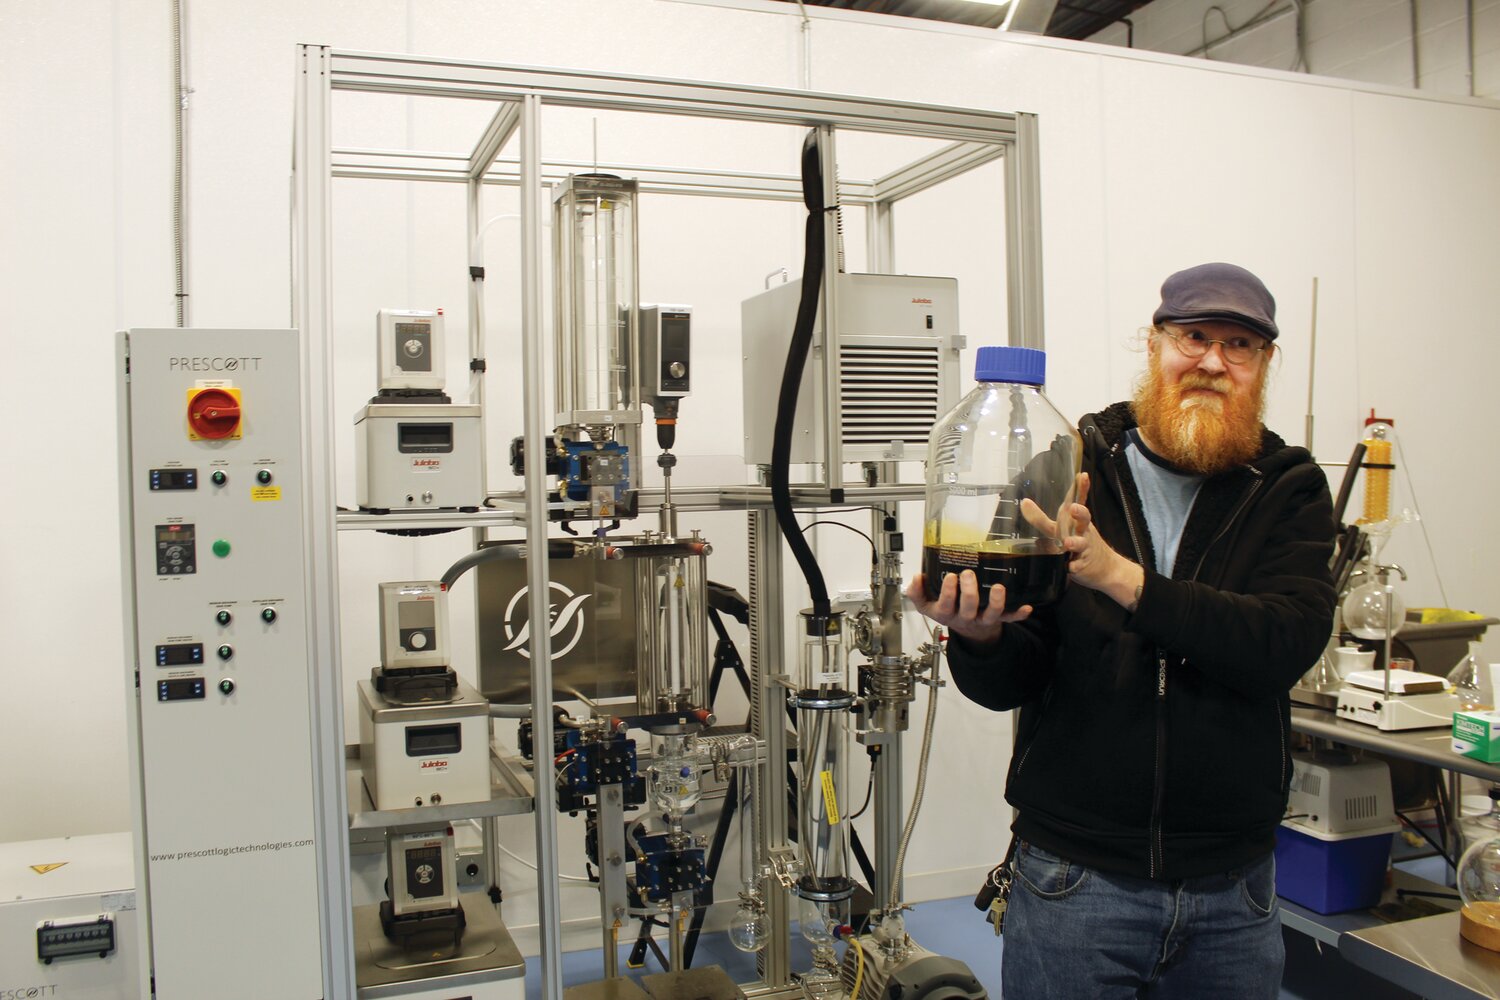 Jason Carlson holds up a bottle of THC distillate, created at Hapi using the CO2 powered extraction device behind him. The extract is used to create number of adult-use spinoffs of popular local brands, including Del's Lemonade and the Original Italian Bakery's pizza chips.